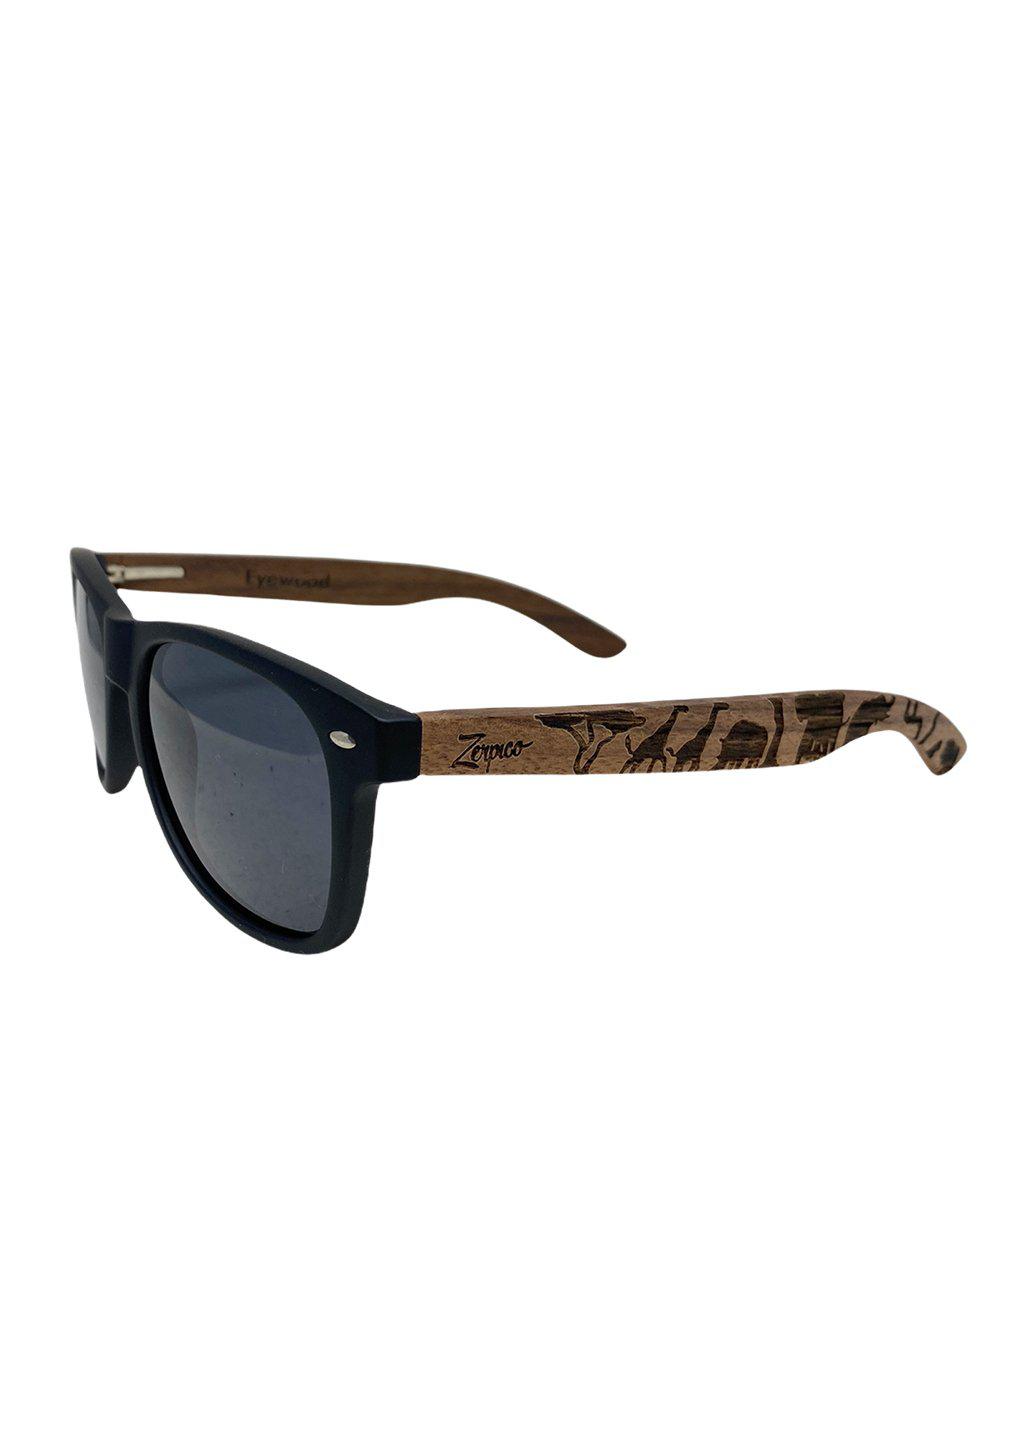 Engraved wooden sunglasses Inspired by the open plains and animals of the African savanna. Studio shoot from the front.